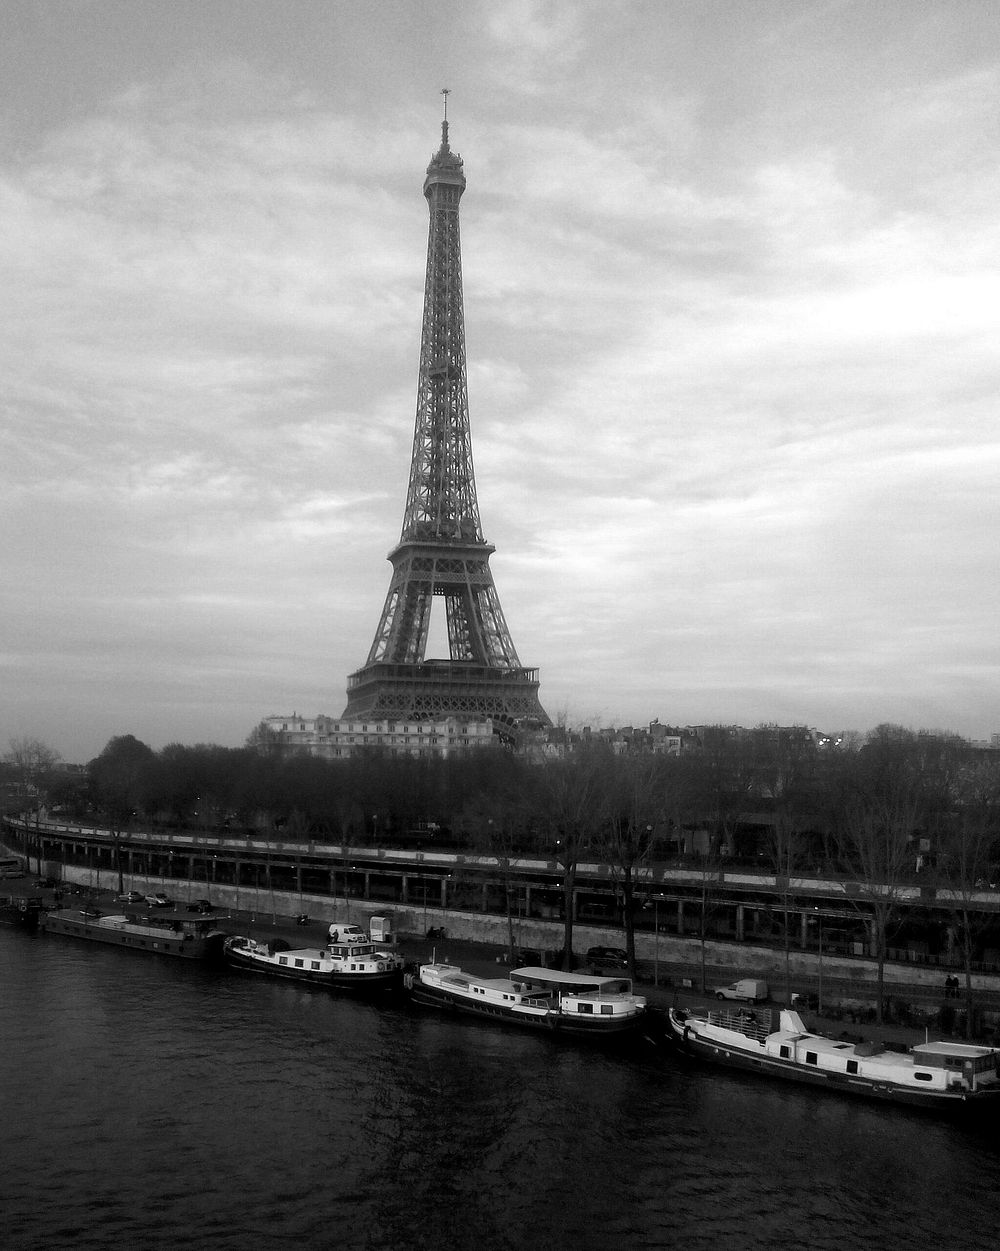 Black and white Eiffel Tower with boats along the river. Original public domain image from Wikimedia Commons